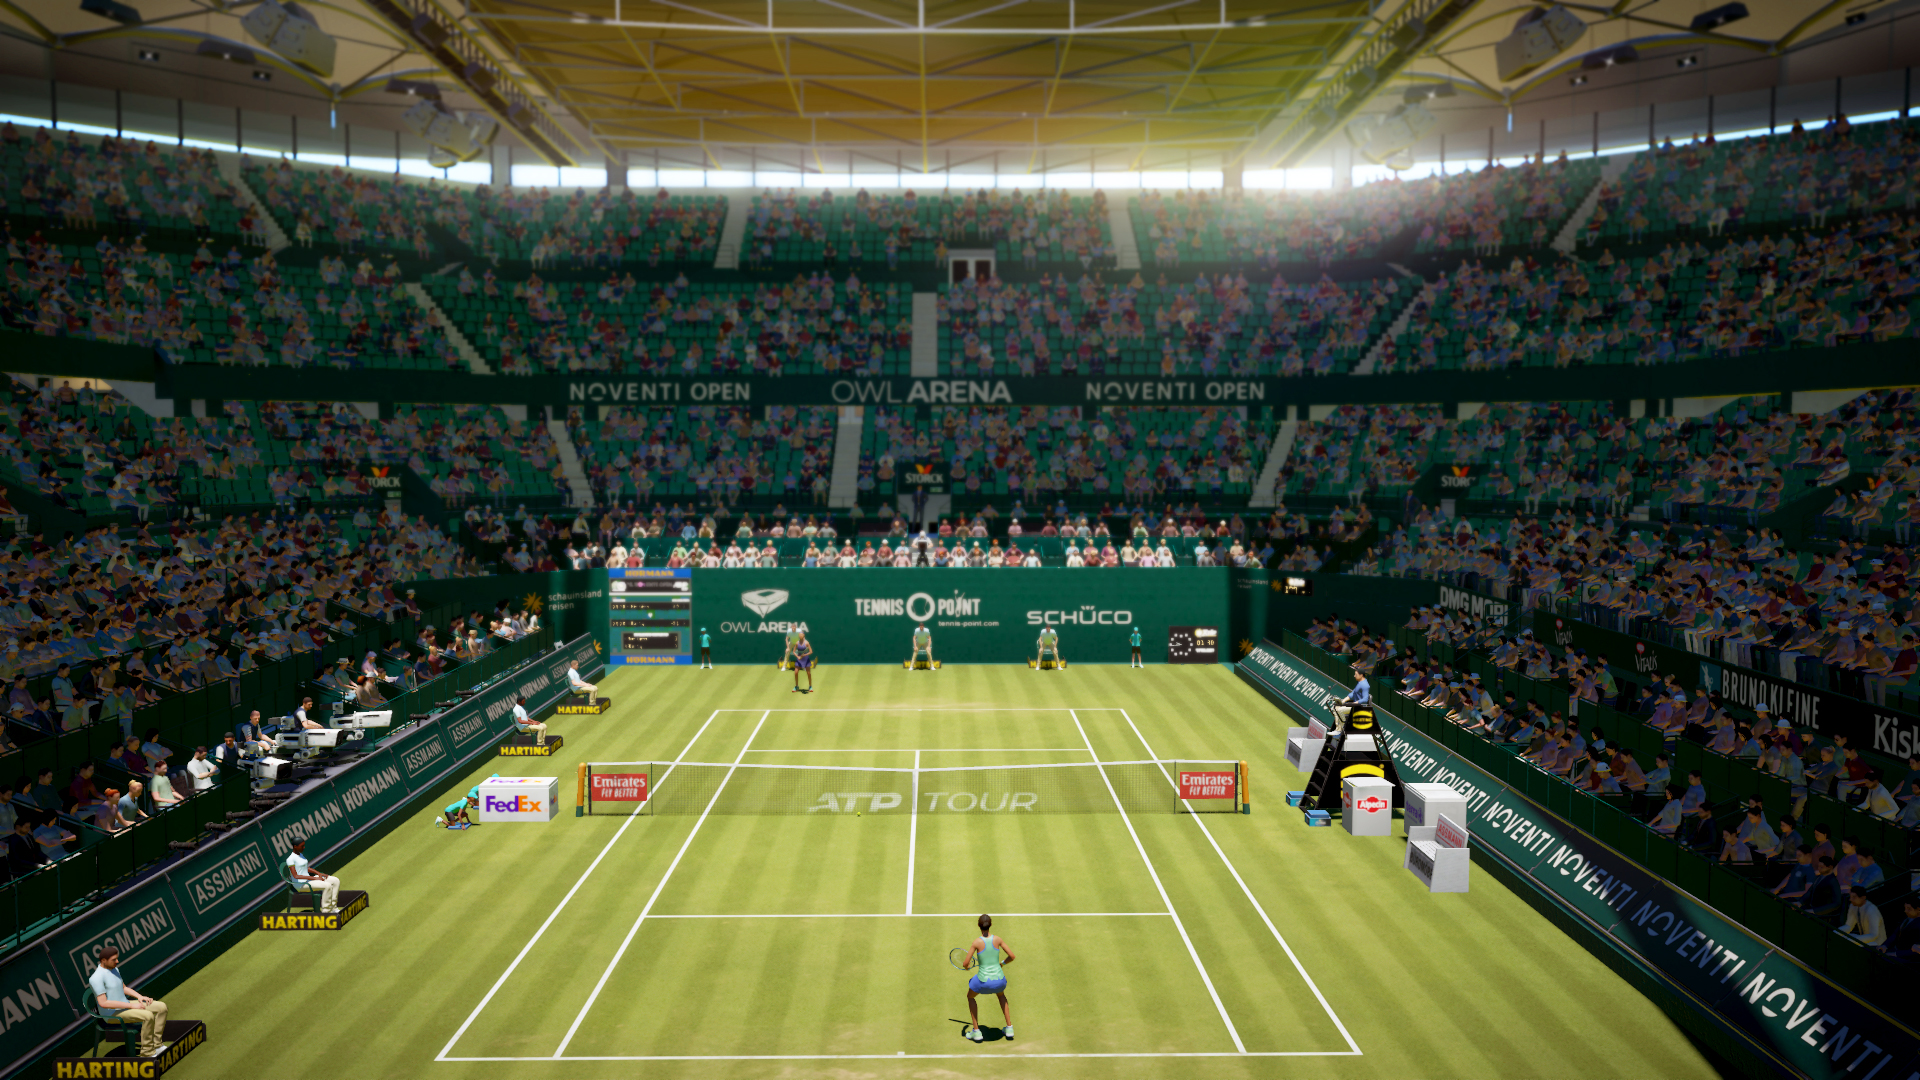 Tennis World Tour 2 on Twitter: "What's your favorite stadium in Tennis  World Tour 2? What other stadiums would you like to see in the game?  https://t.co/dRjxDD3gGp" / Twitter